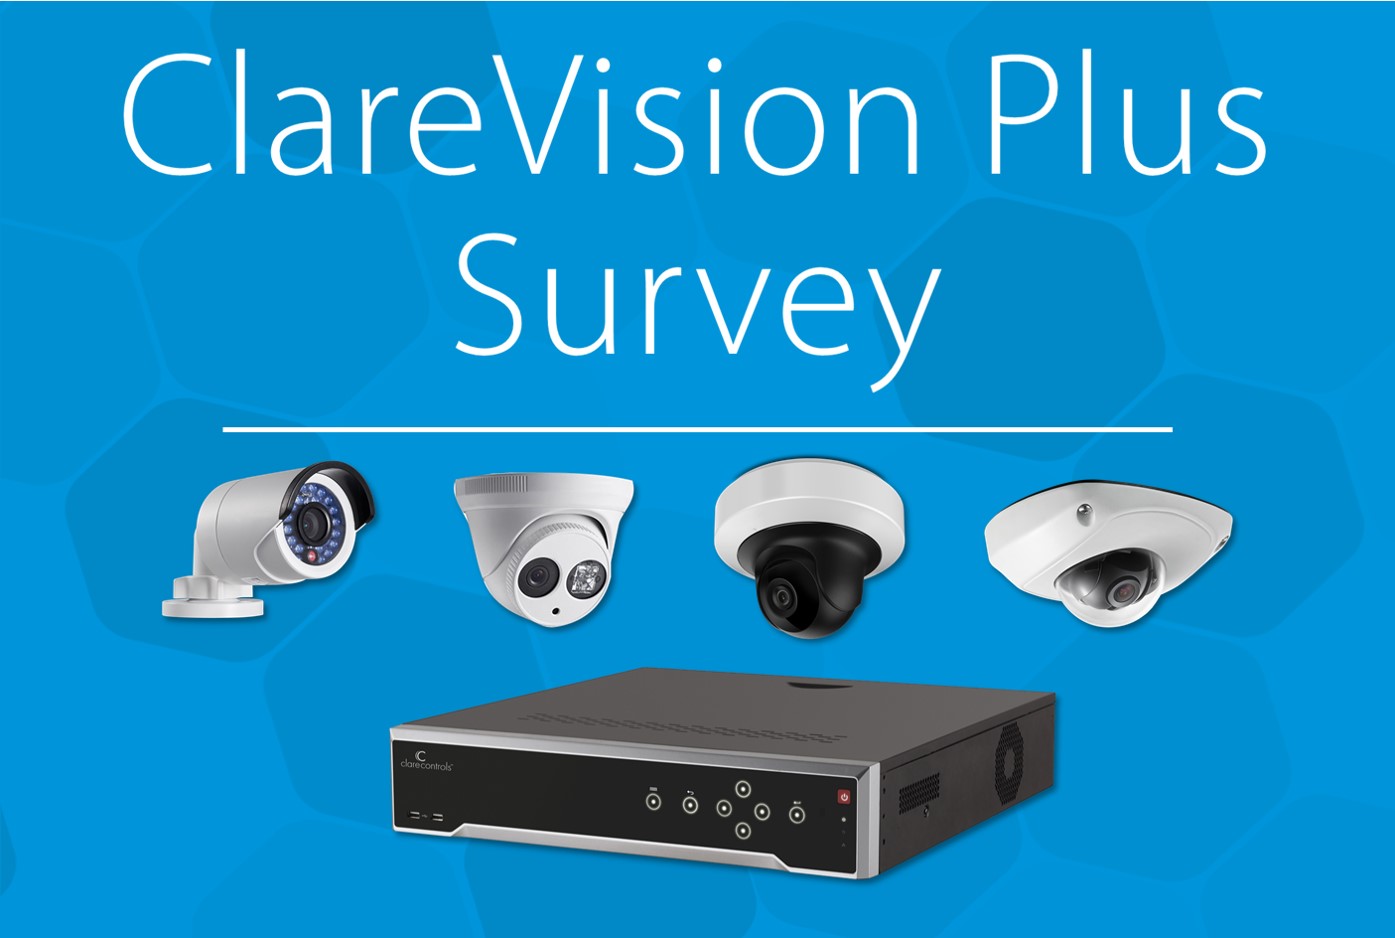 Let Us Know Your Thoughts On ClareVision Plus